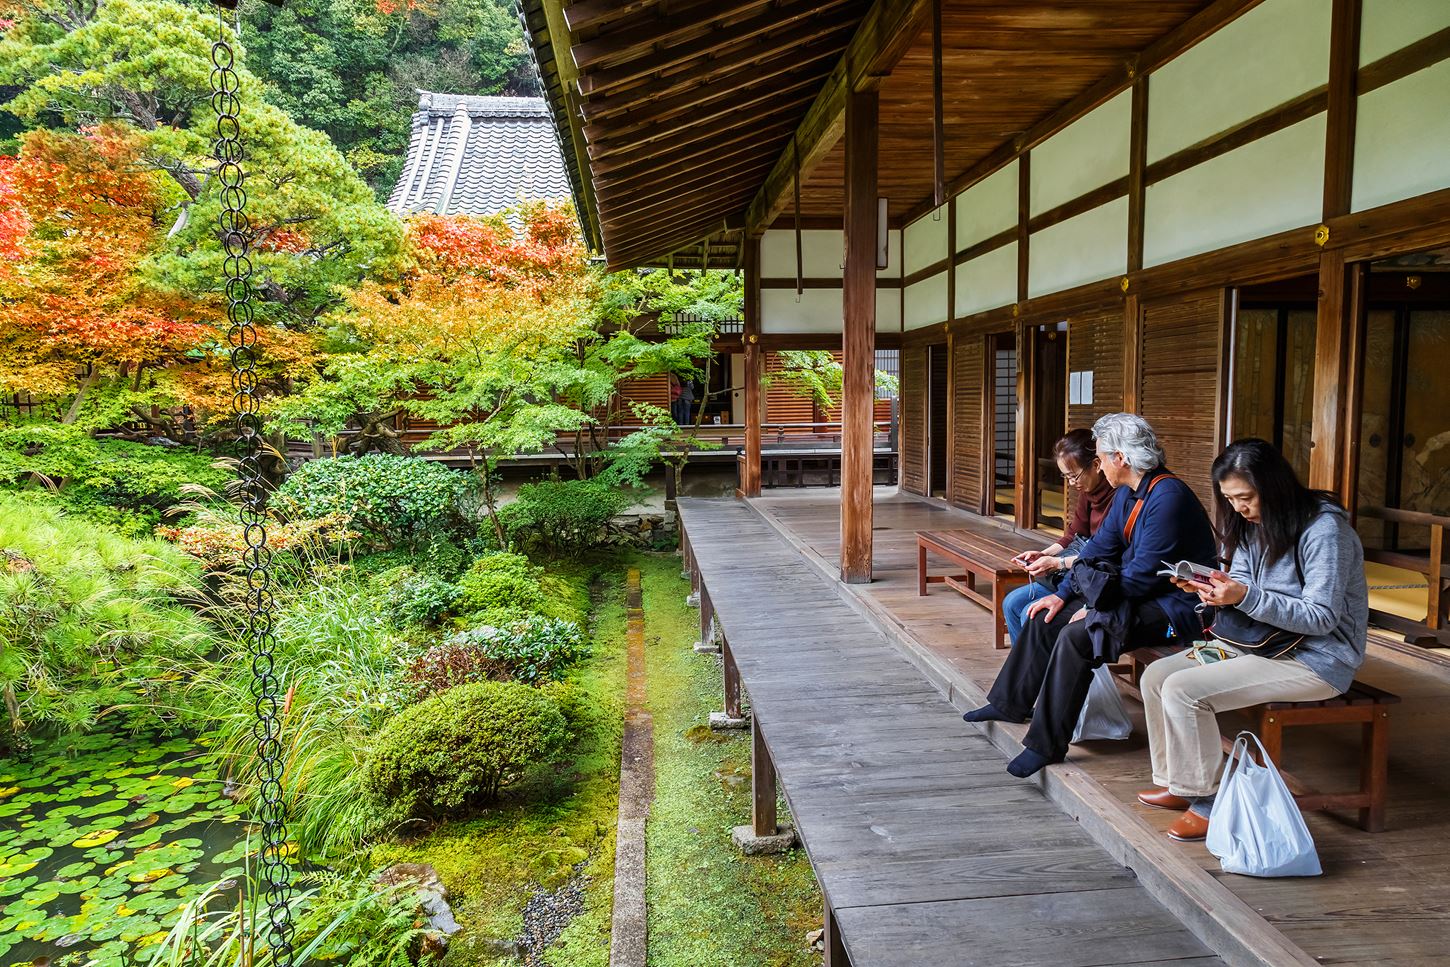 Sightseeing scenery that simply shows the weather in Kyoto in October4